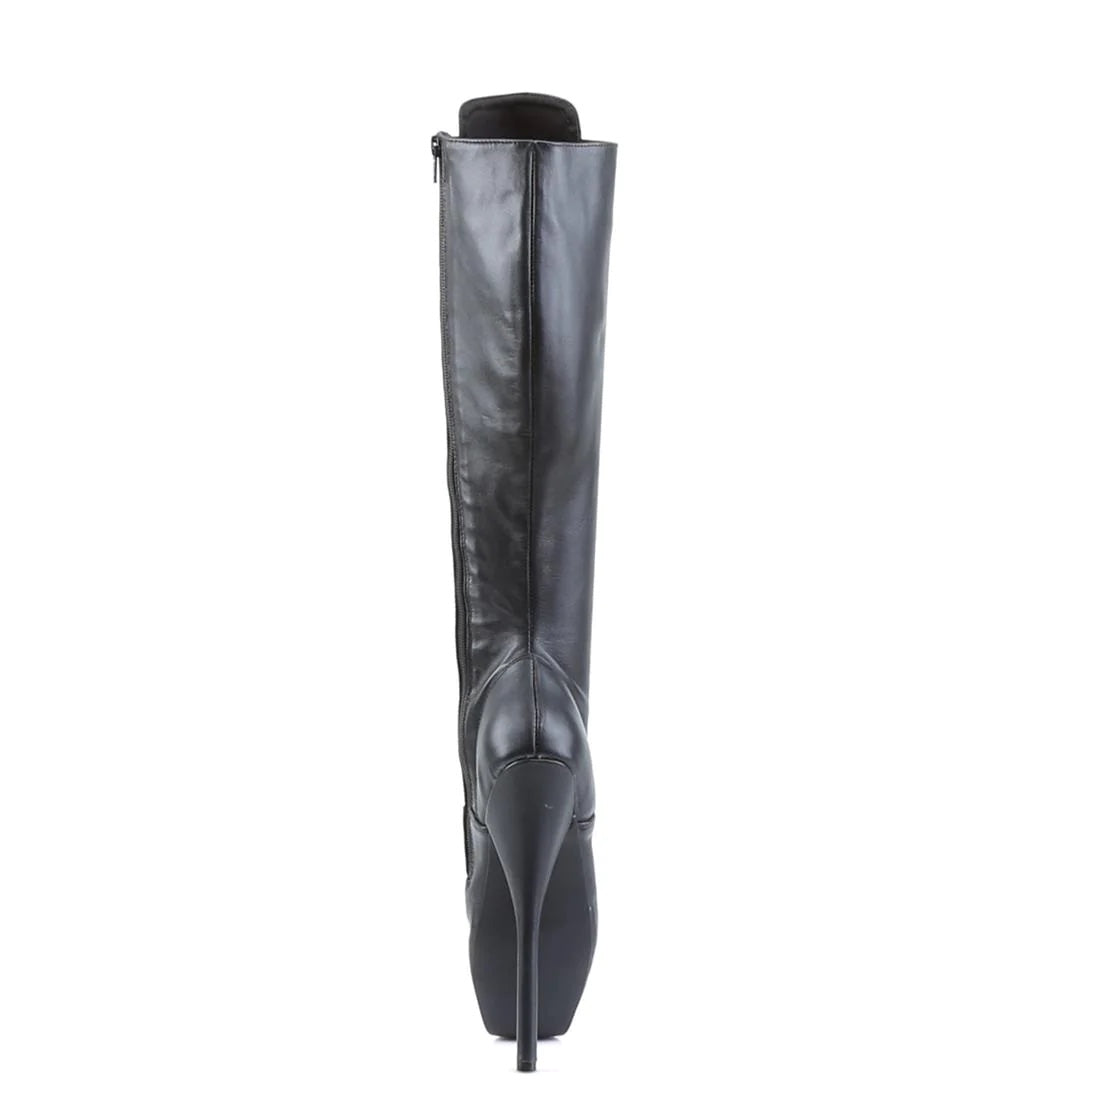 The black Leather 7" Ballet Lace Up Knee High Boot, rear view.